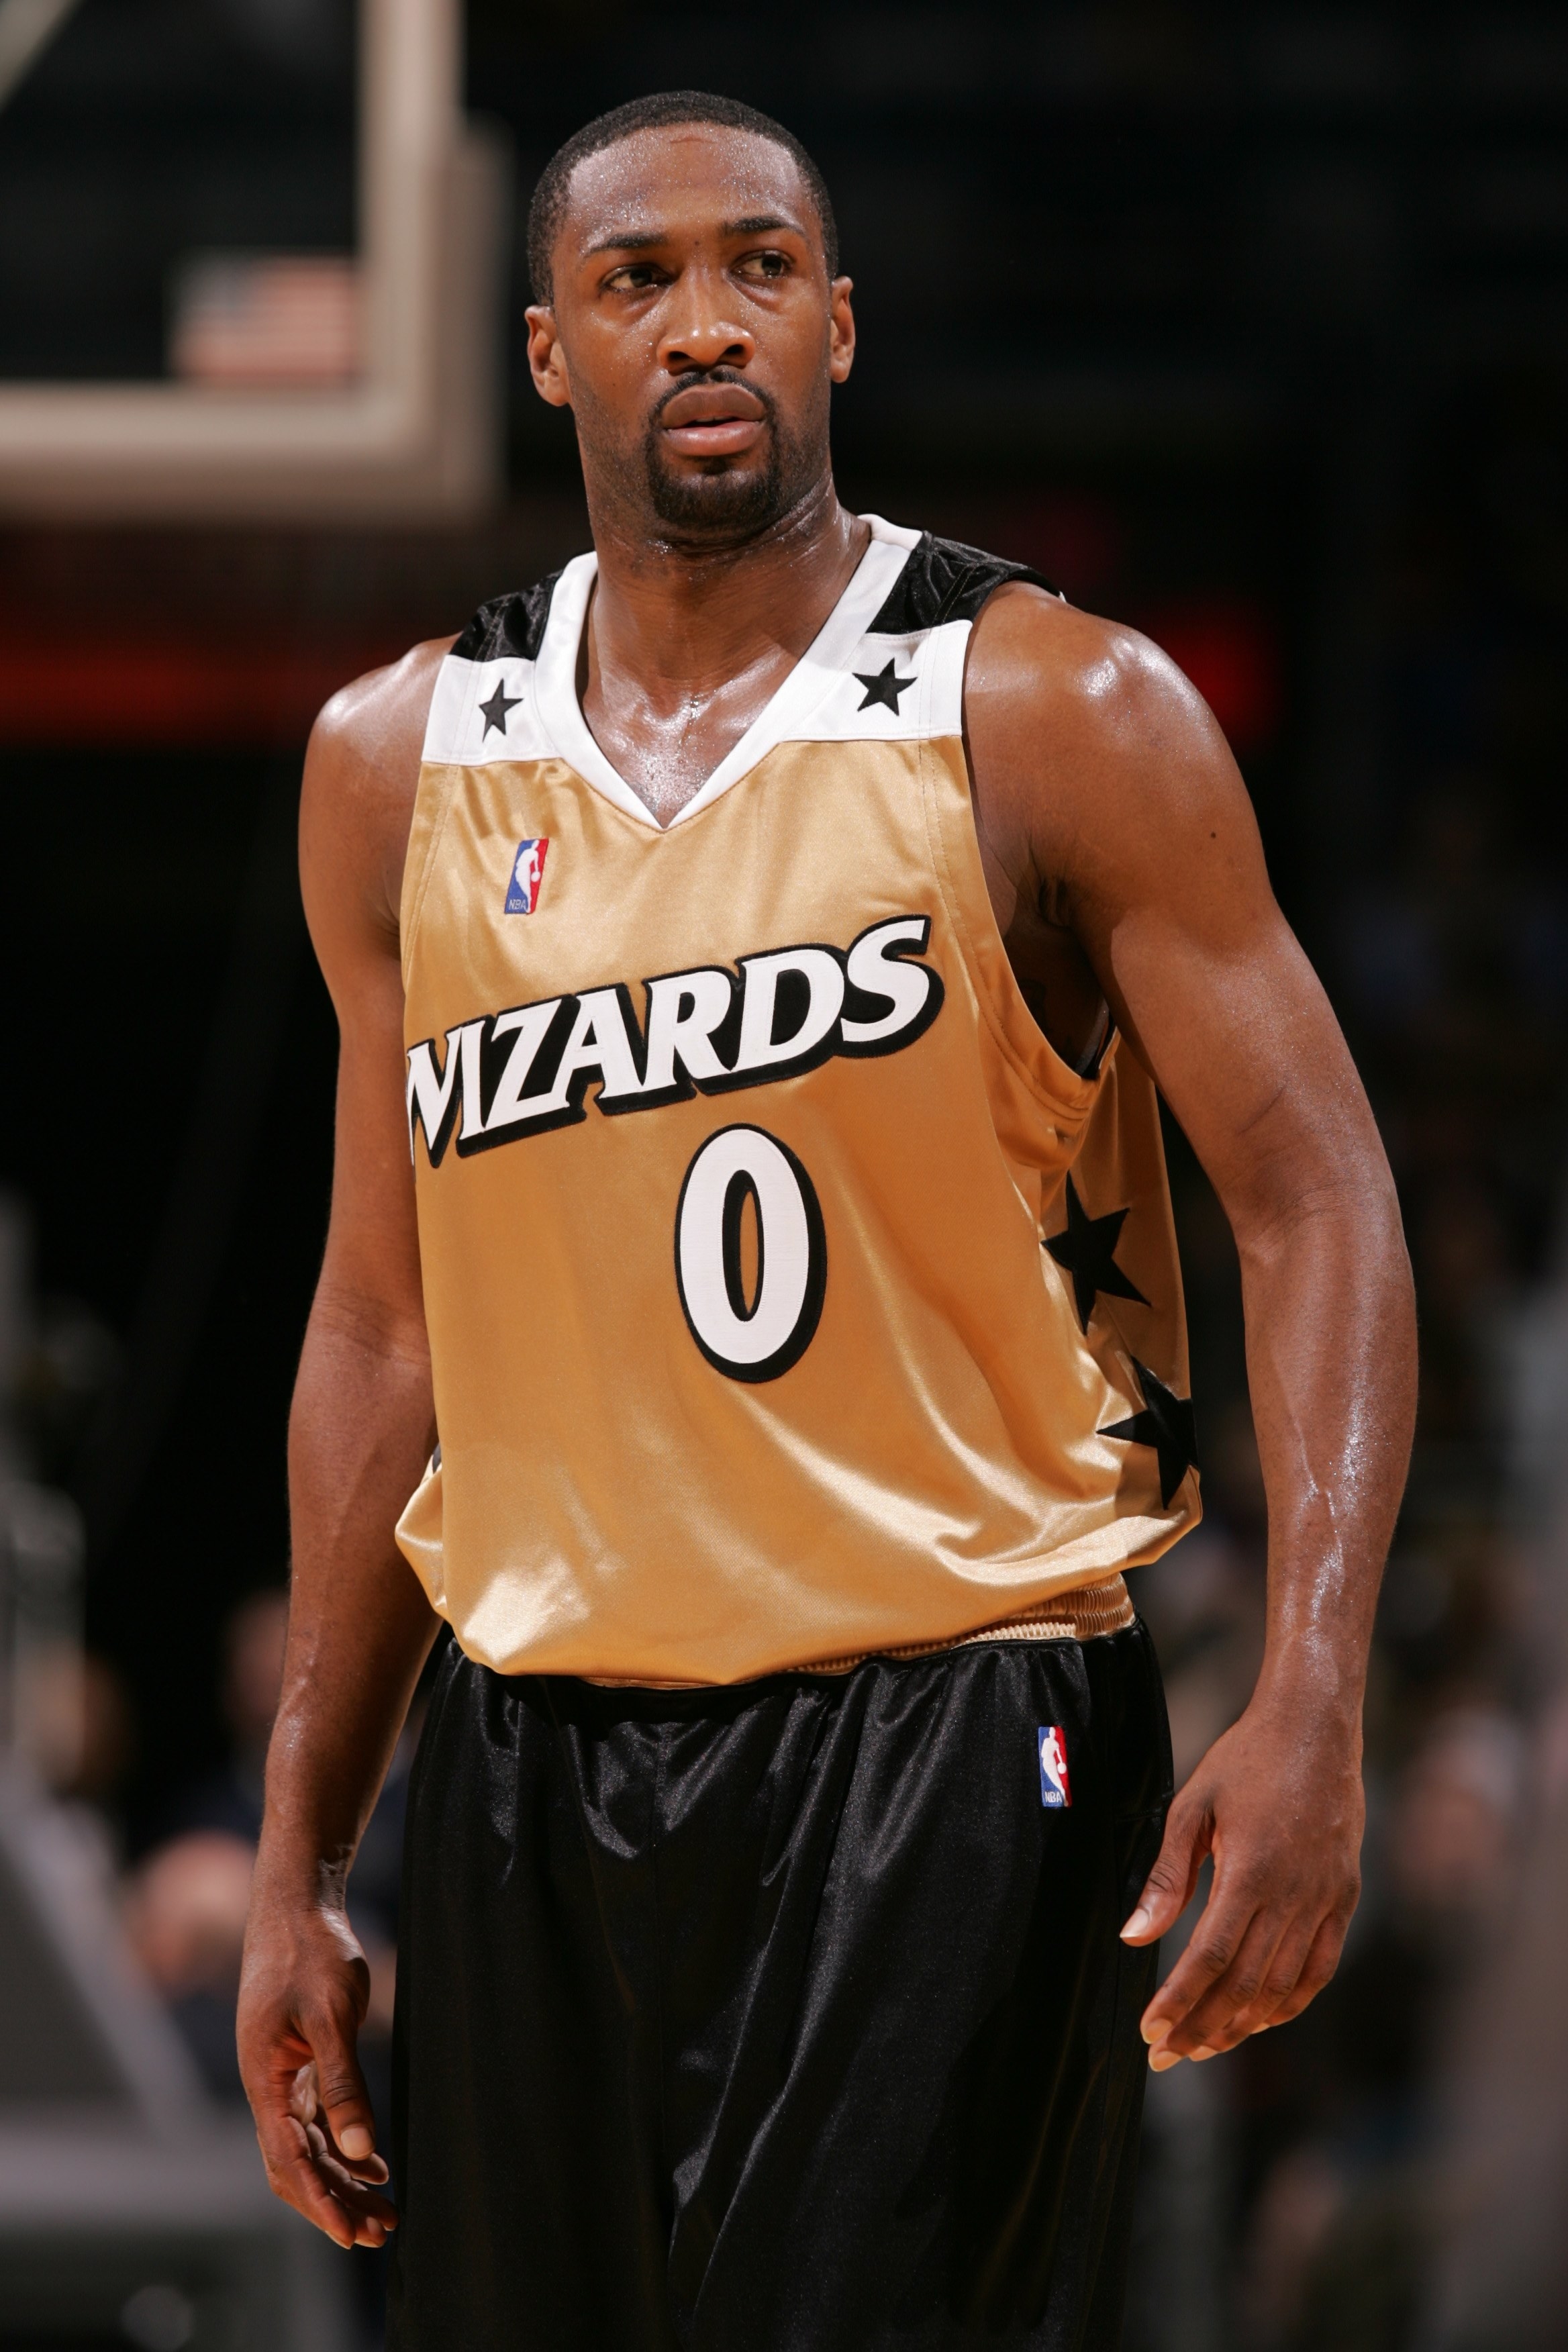 Gold Wizards uniform with black stars and white outlining